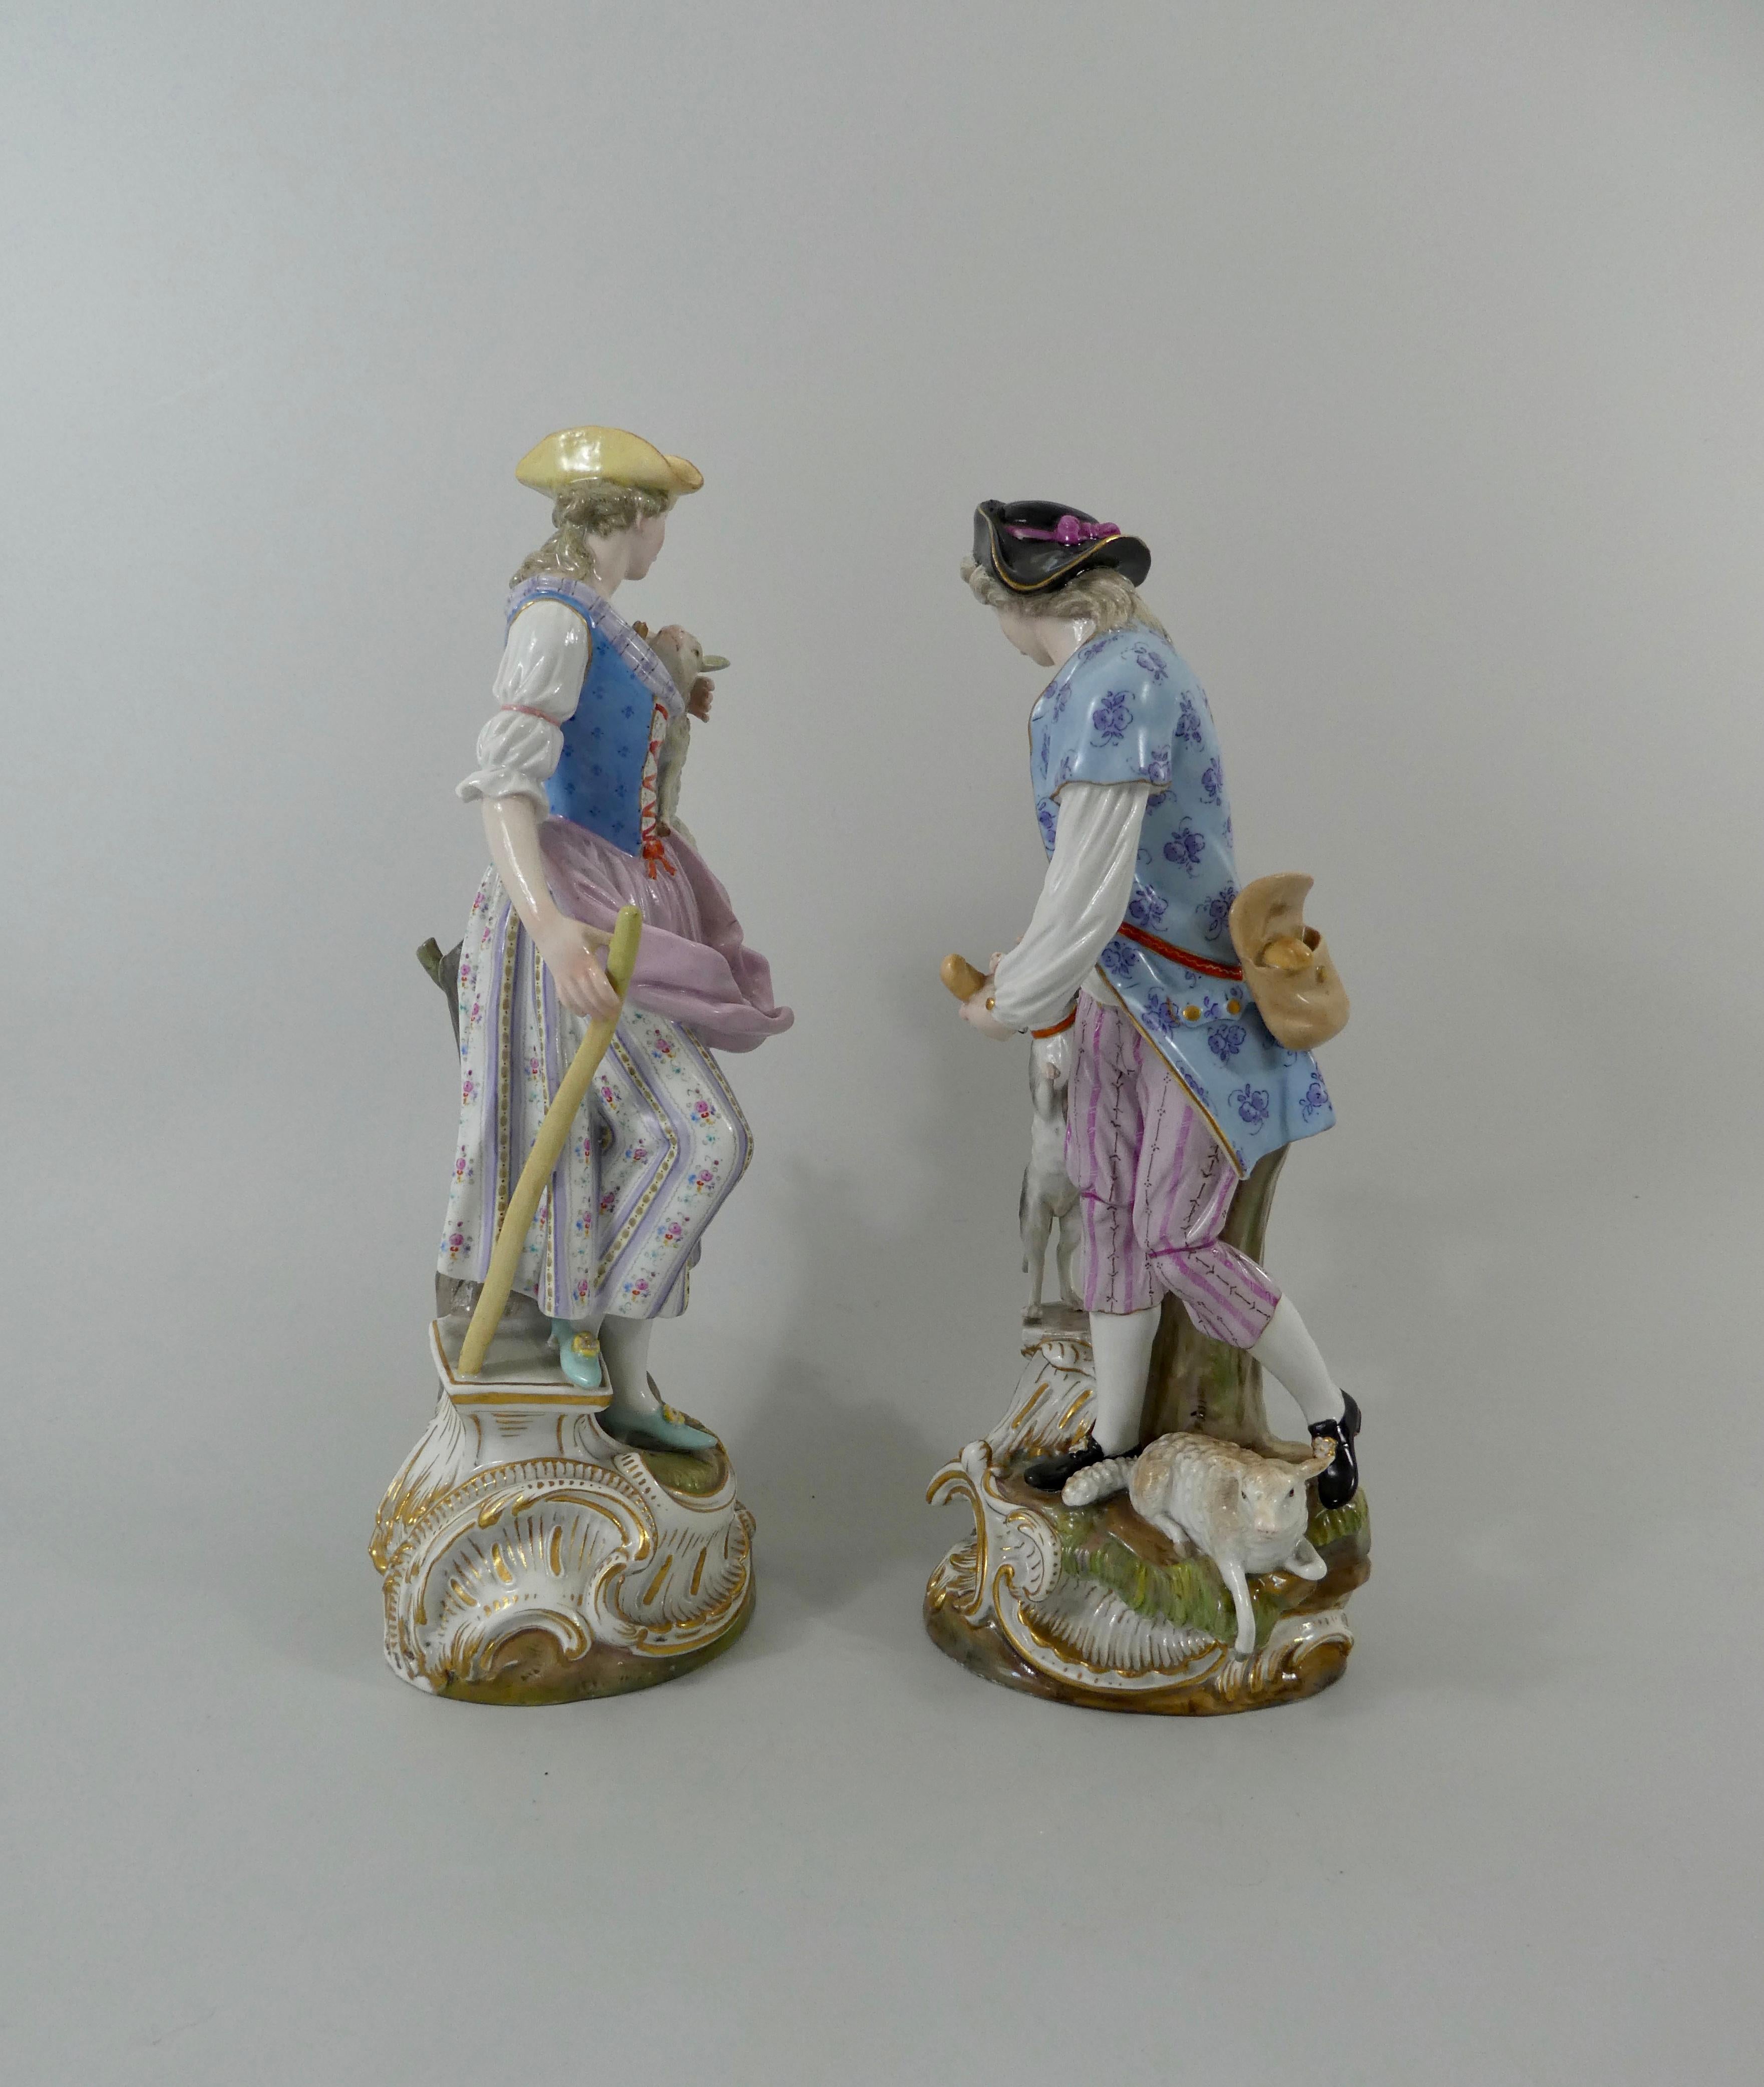 A fine and large pair of Meissen porcelain figures, circa 1870. Beautifully modelled as a shepherd and a shepherdess, with sheep and his dog, and dressed in 18th century costume. Both figures standing before tree stumps, upon grassy mound bases,